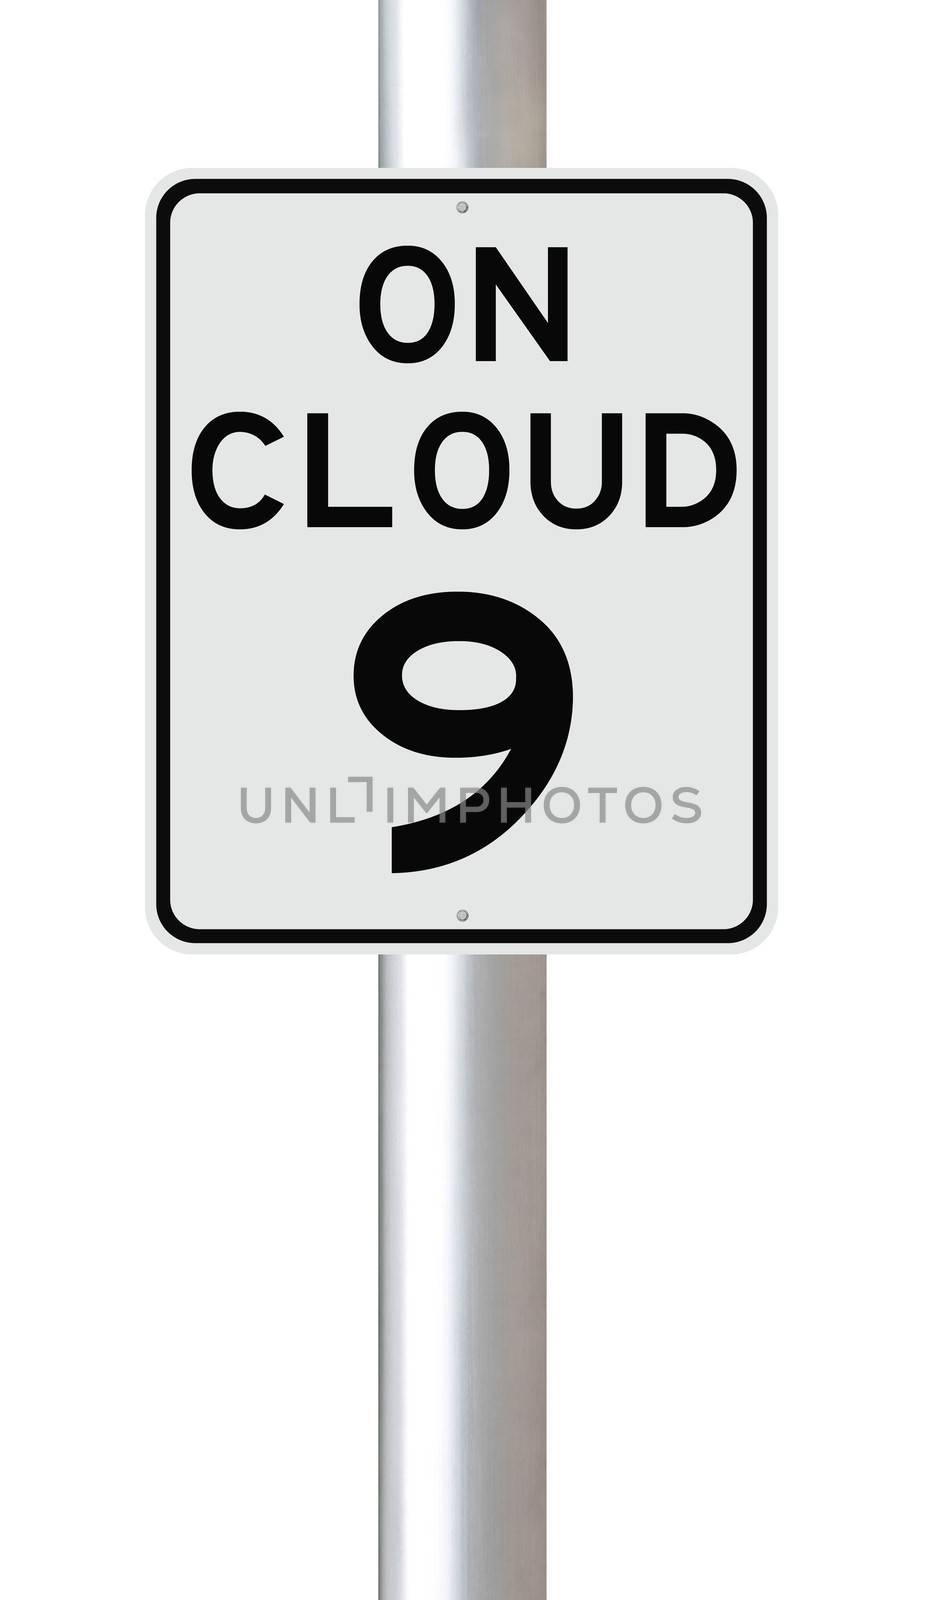 A modified speed limit sign indicating On Cloud 9